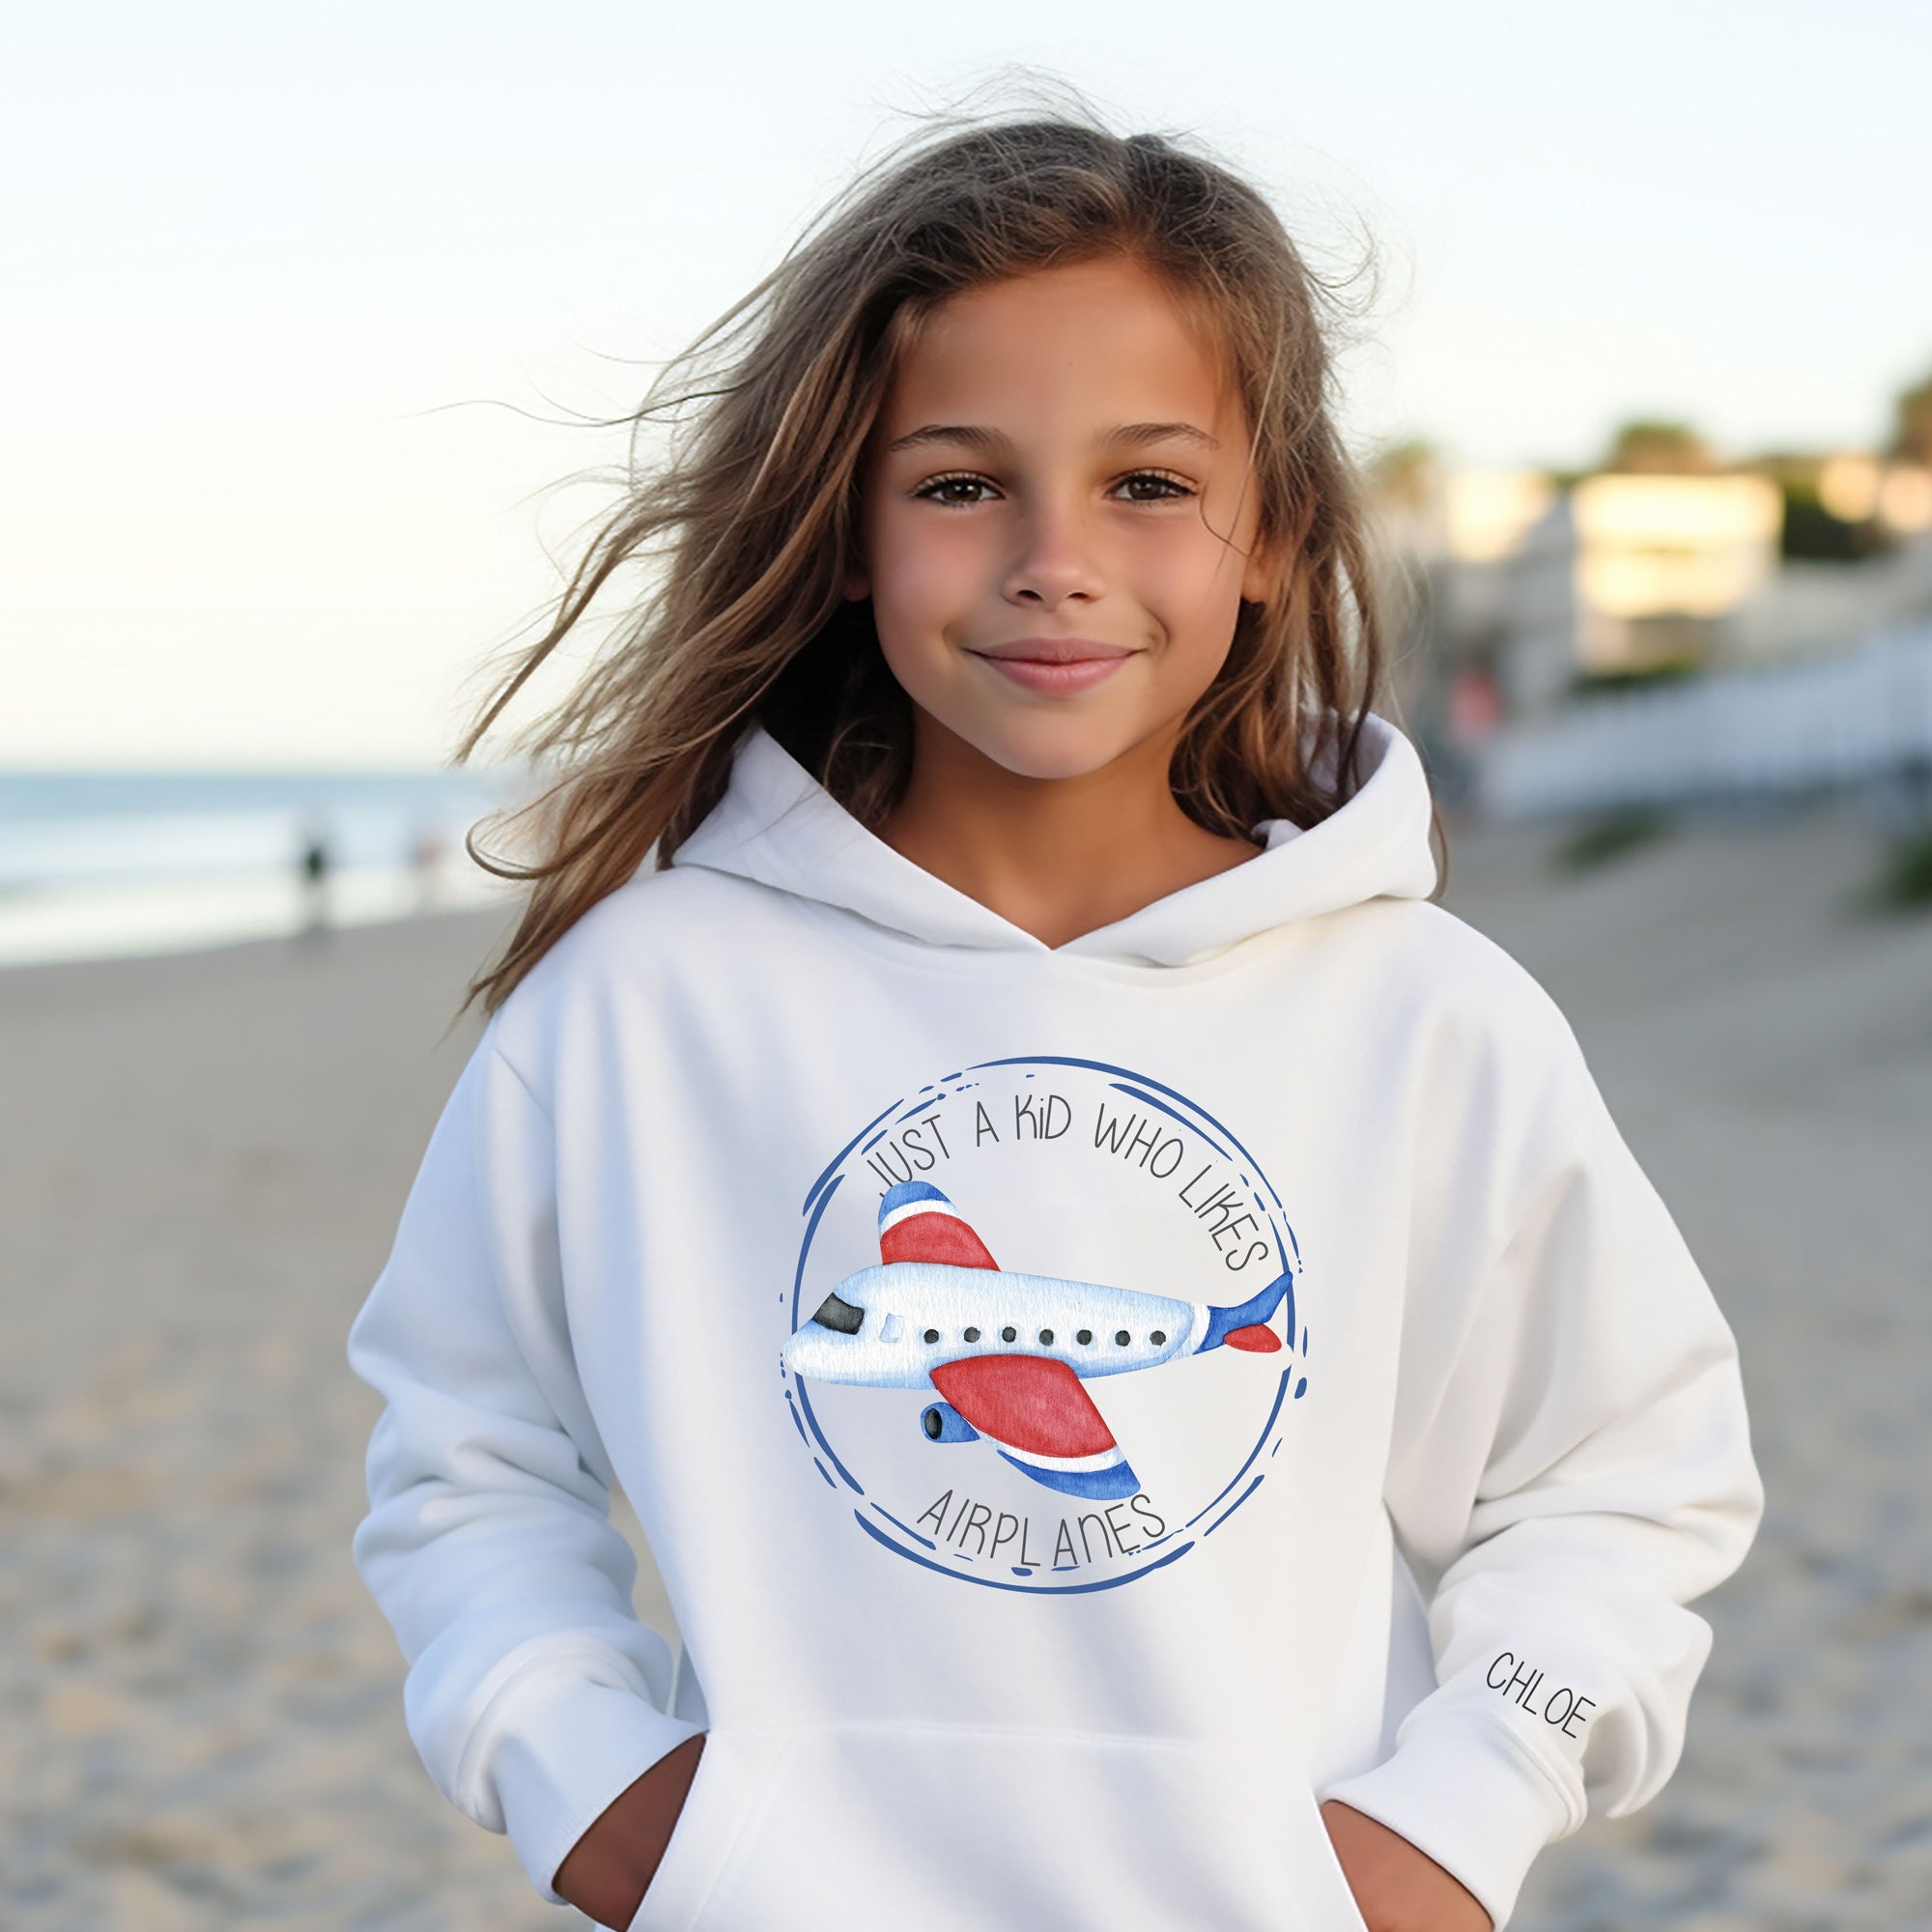 Just a Kid who likes AIRPLANES - Personalized Apparel